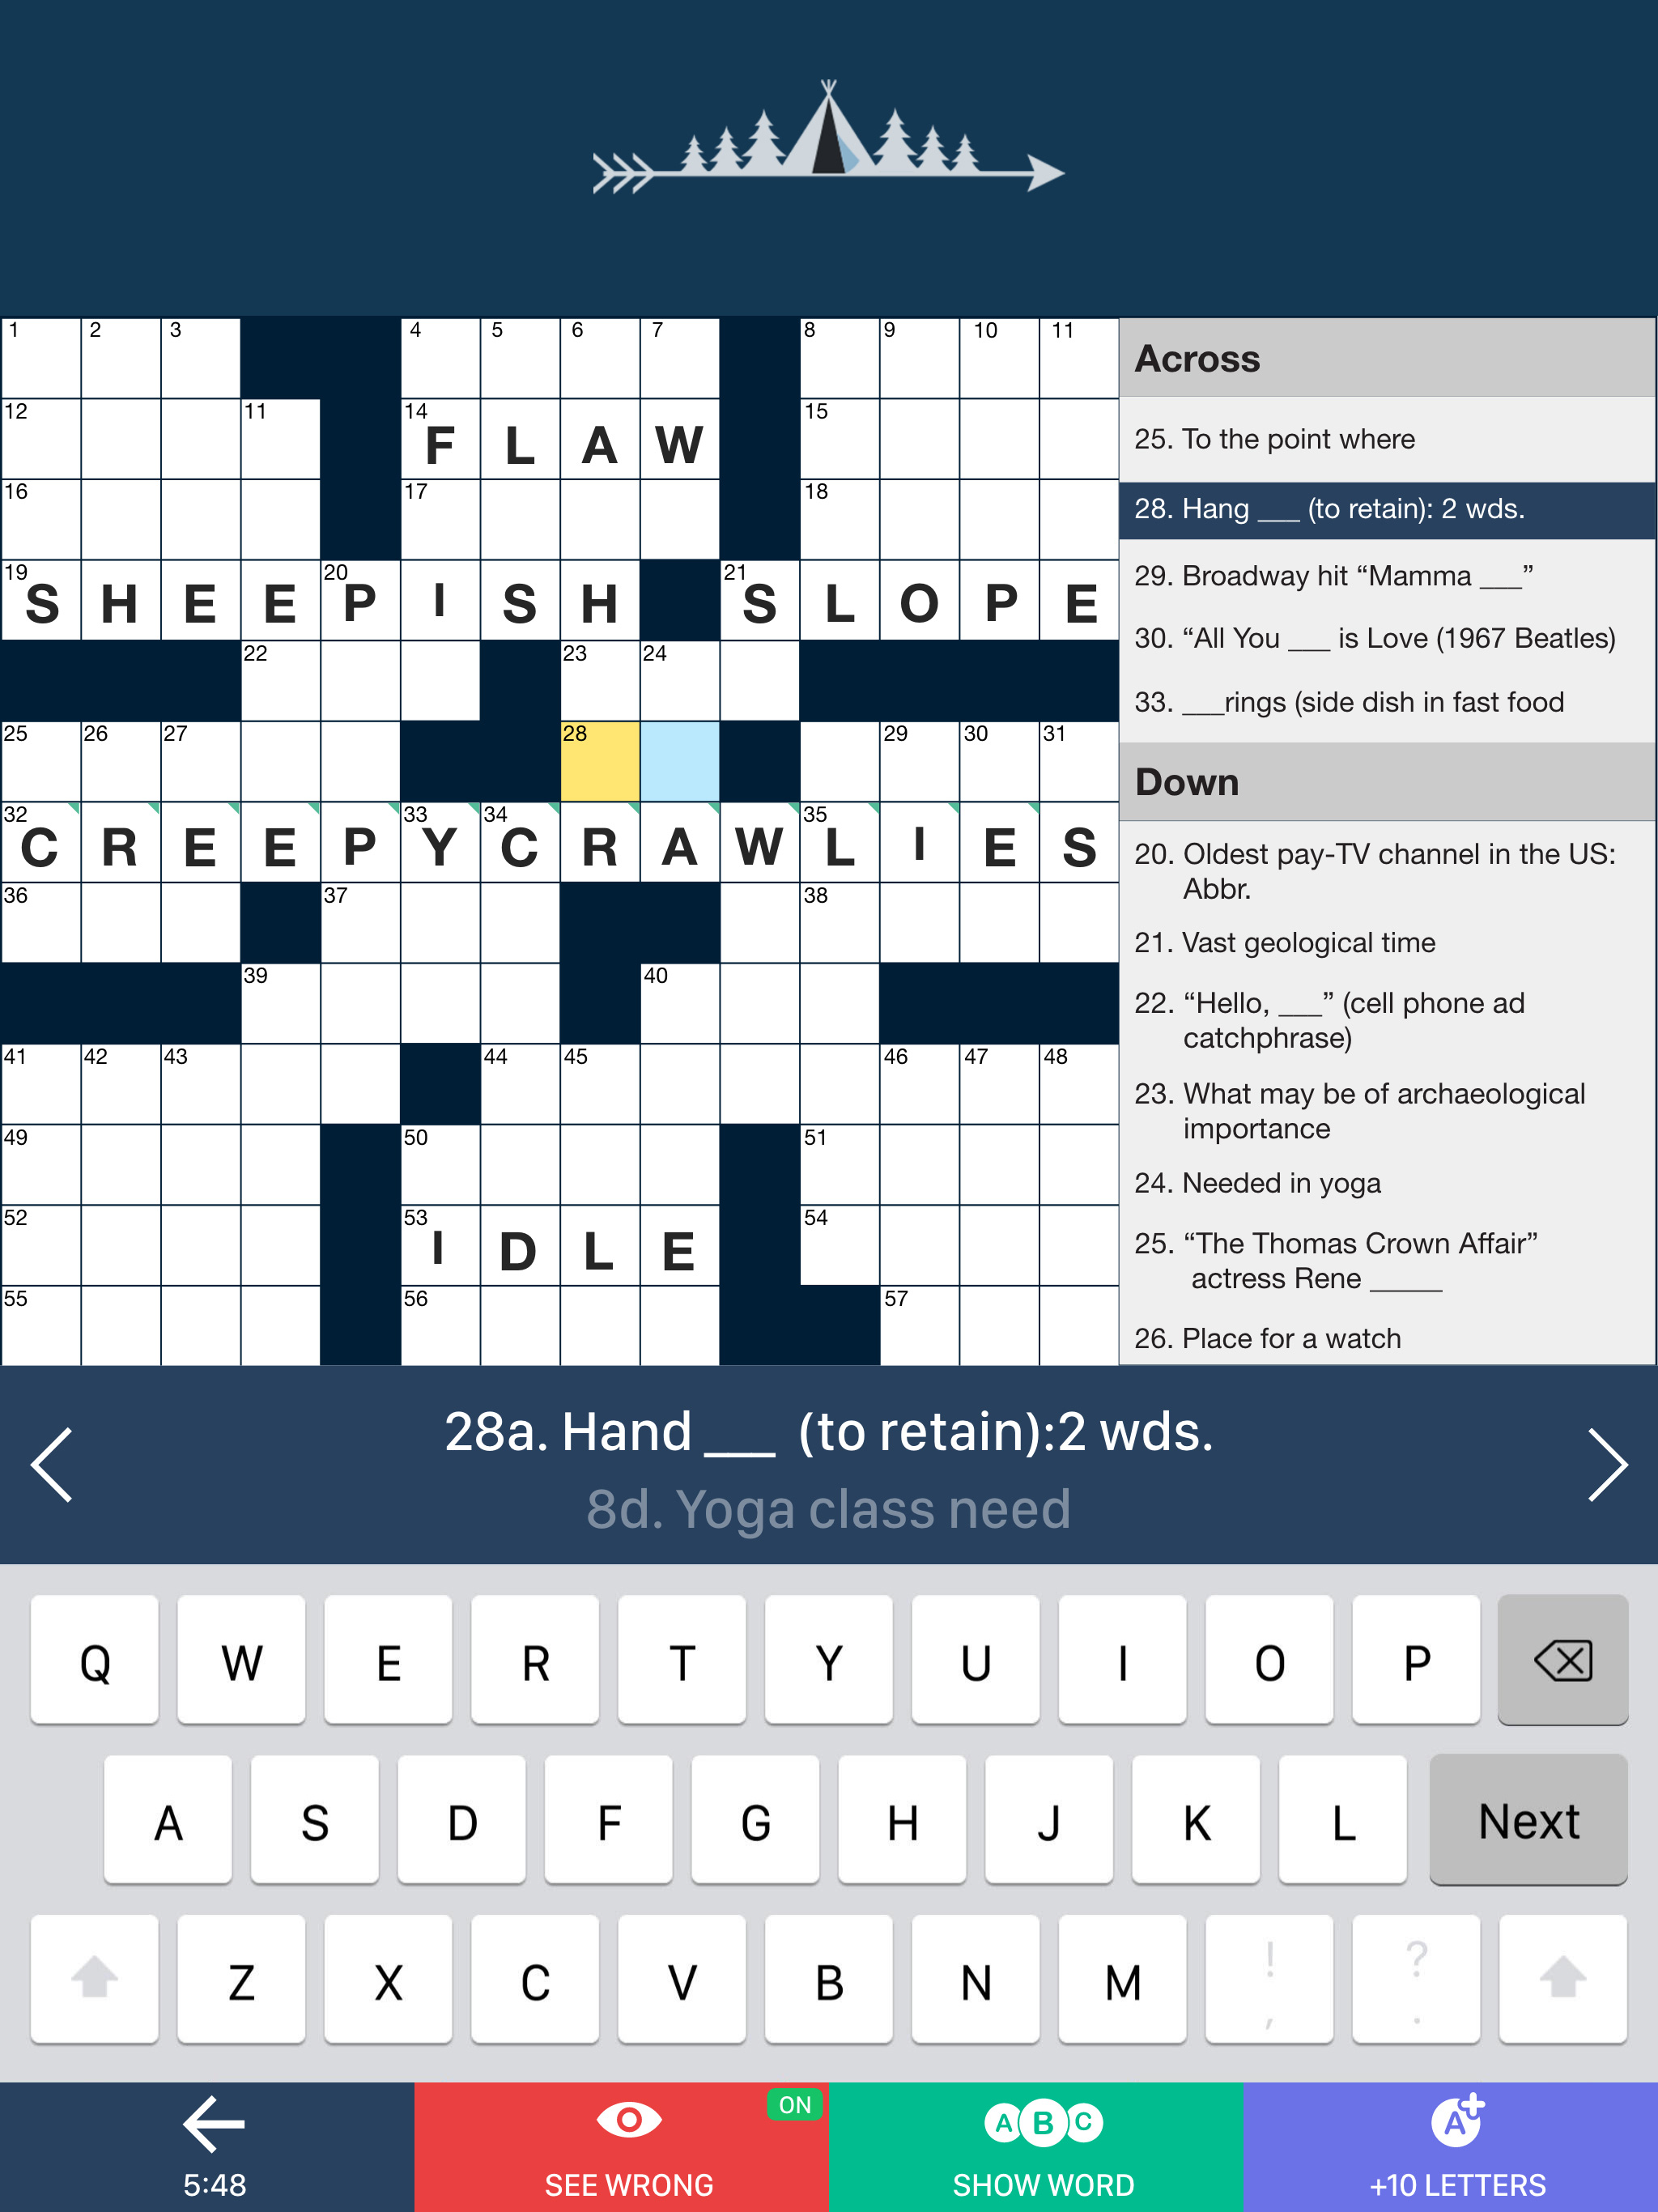 Apple arcade launches more than 130 award winning games TinyCrossword 040221